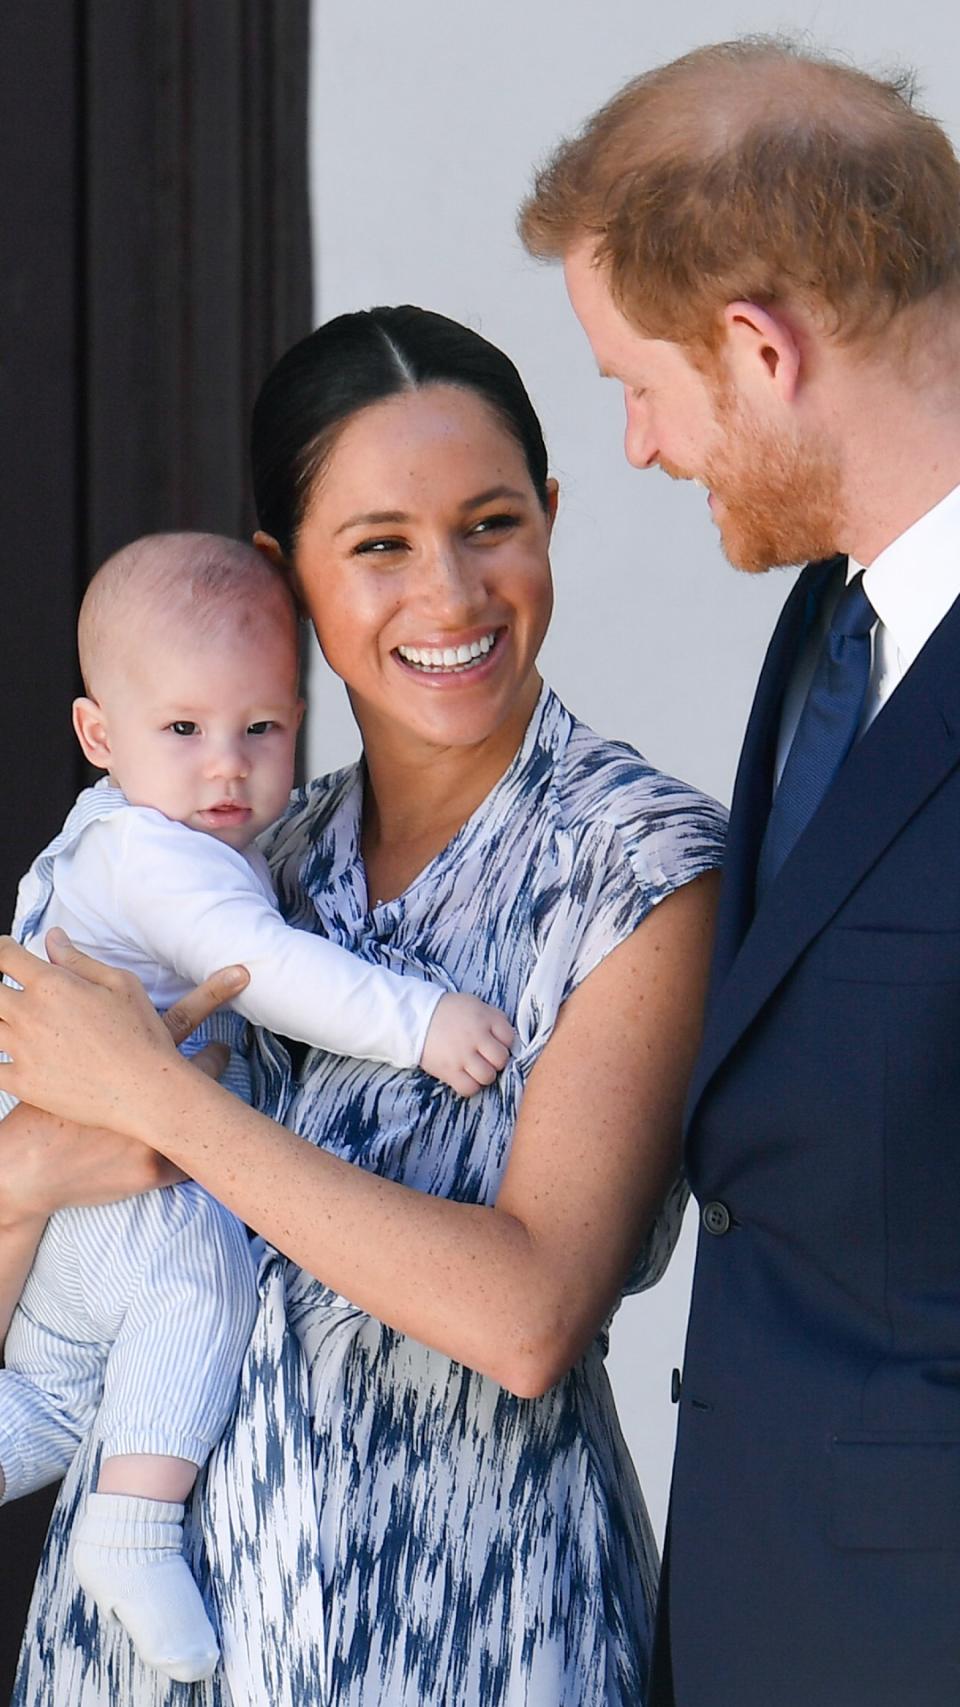 <p> At just four months old, Prince Archie became a jetsetter, joining his royal parents for a visit to South Africa. The young prince even got to meet Archbishop Desmond Tutu. </p>